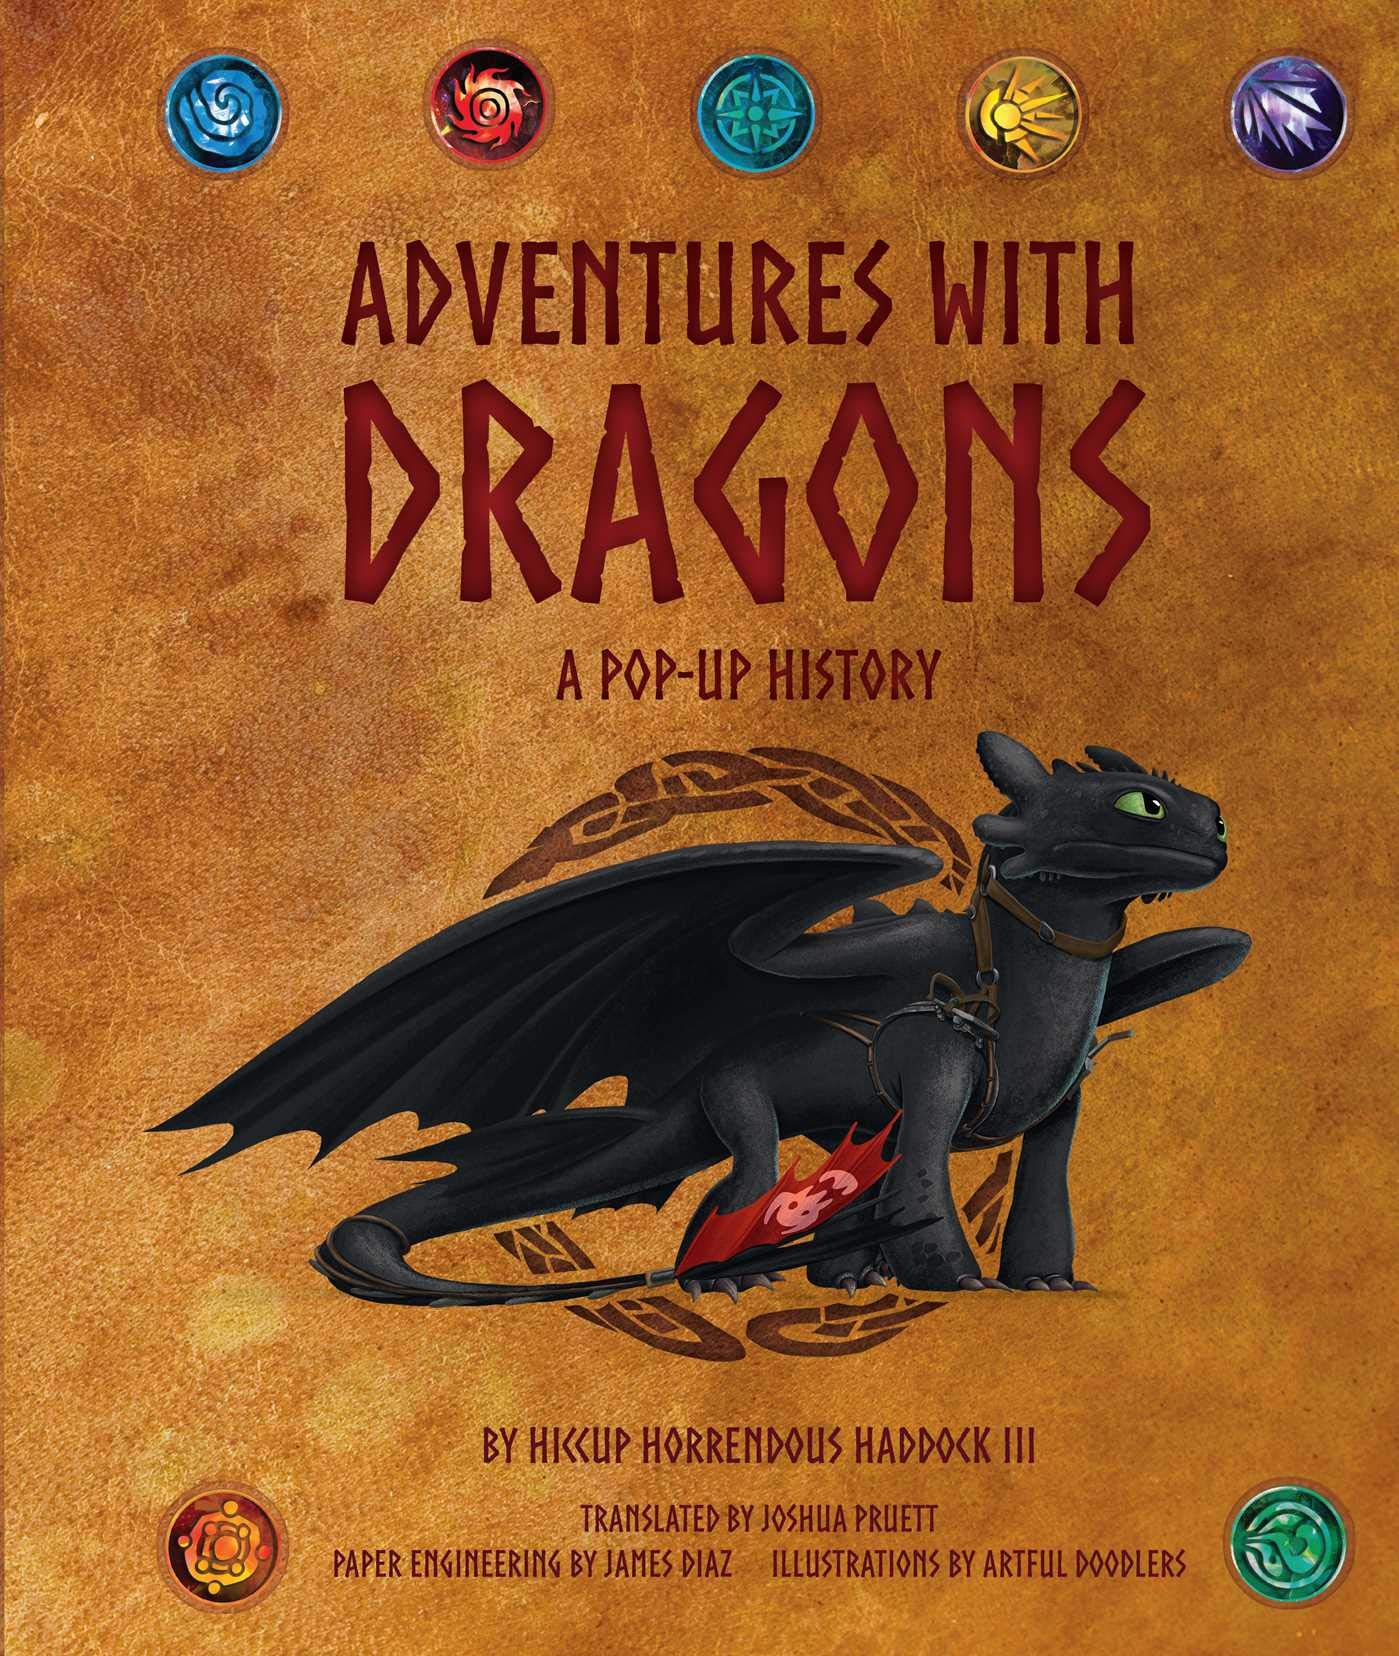 ADVENTURES WITH DRAGONS – A Pop-Up History